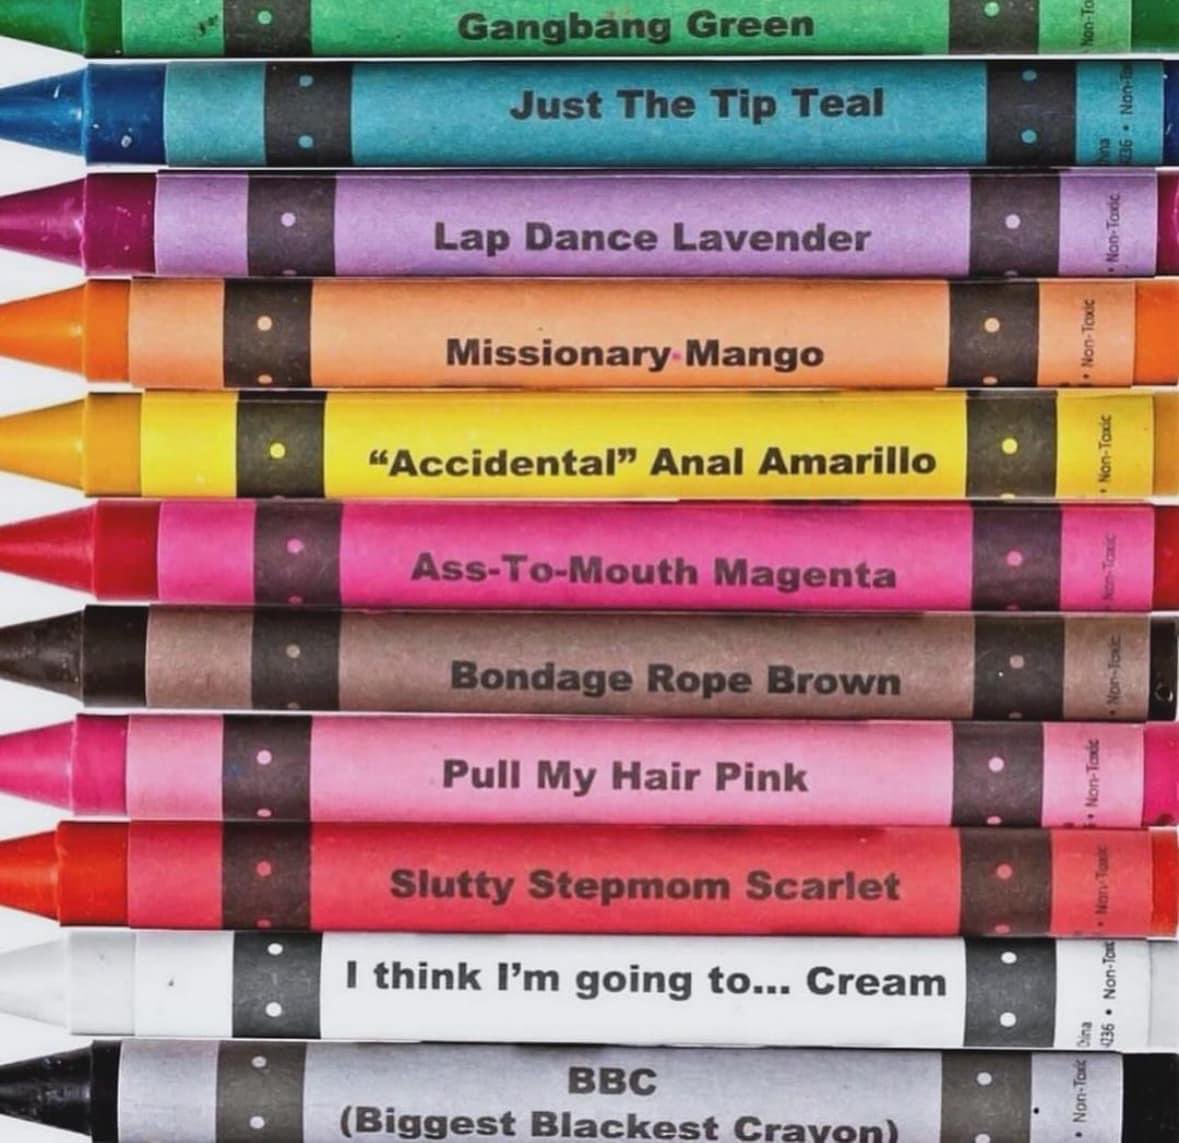 Which hellaverse character would own these crayons